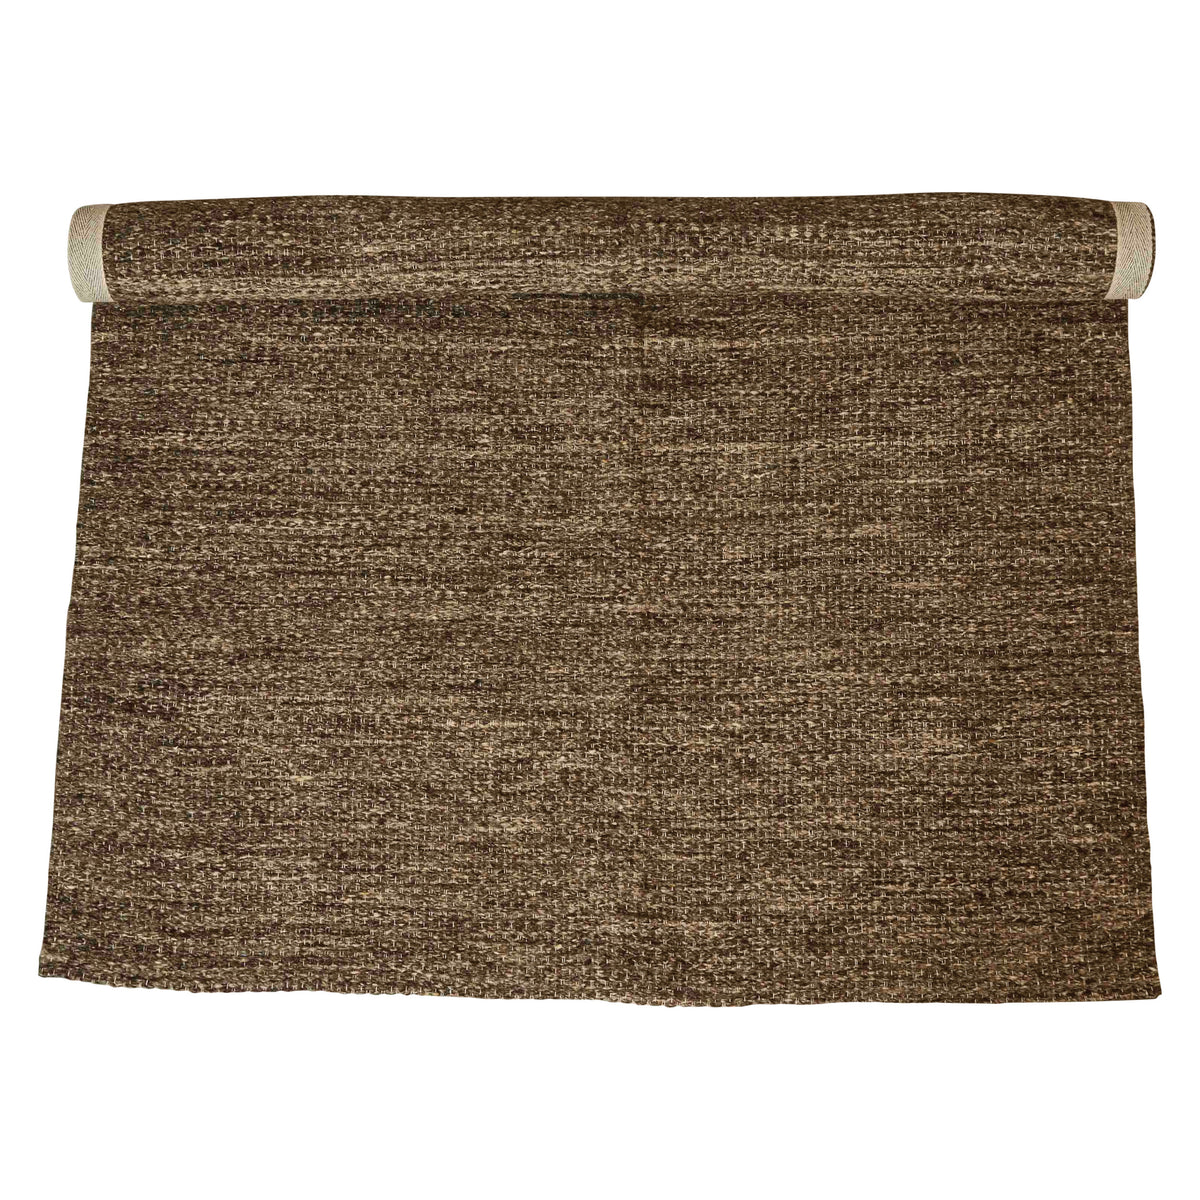 Hand-Woven Wool and Cotton Blend Rug